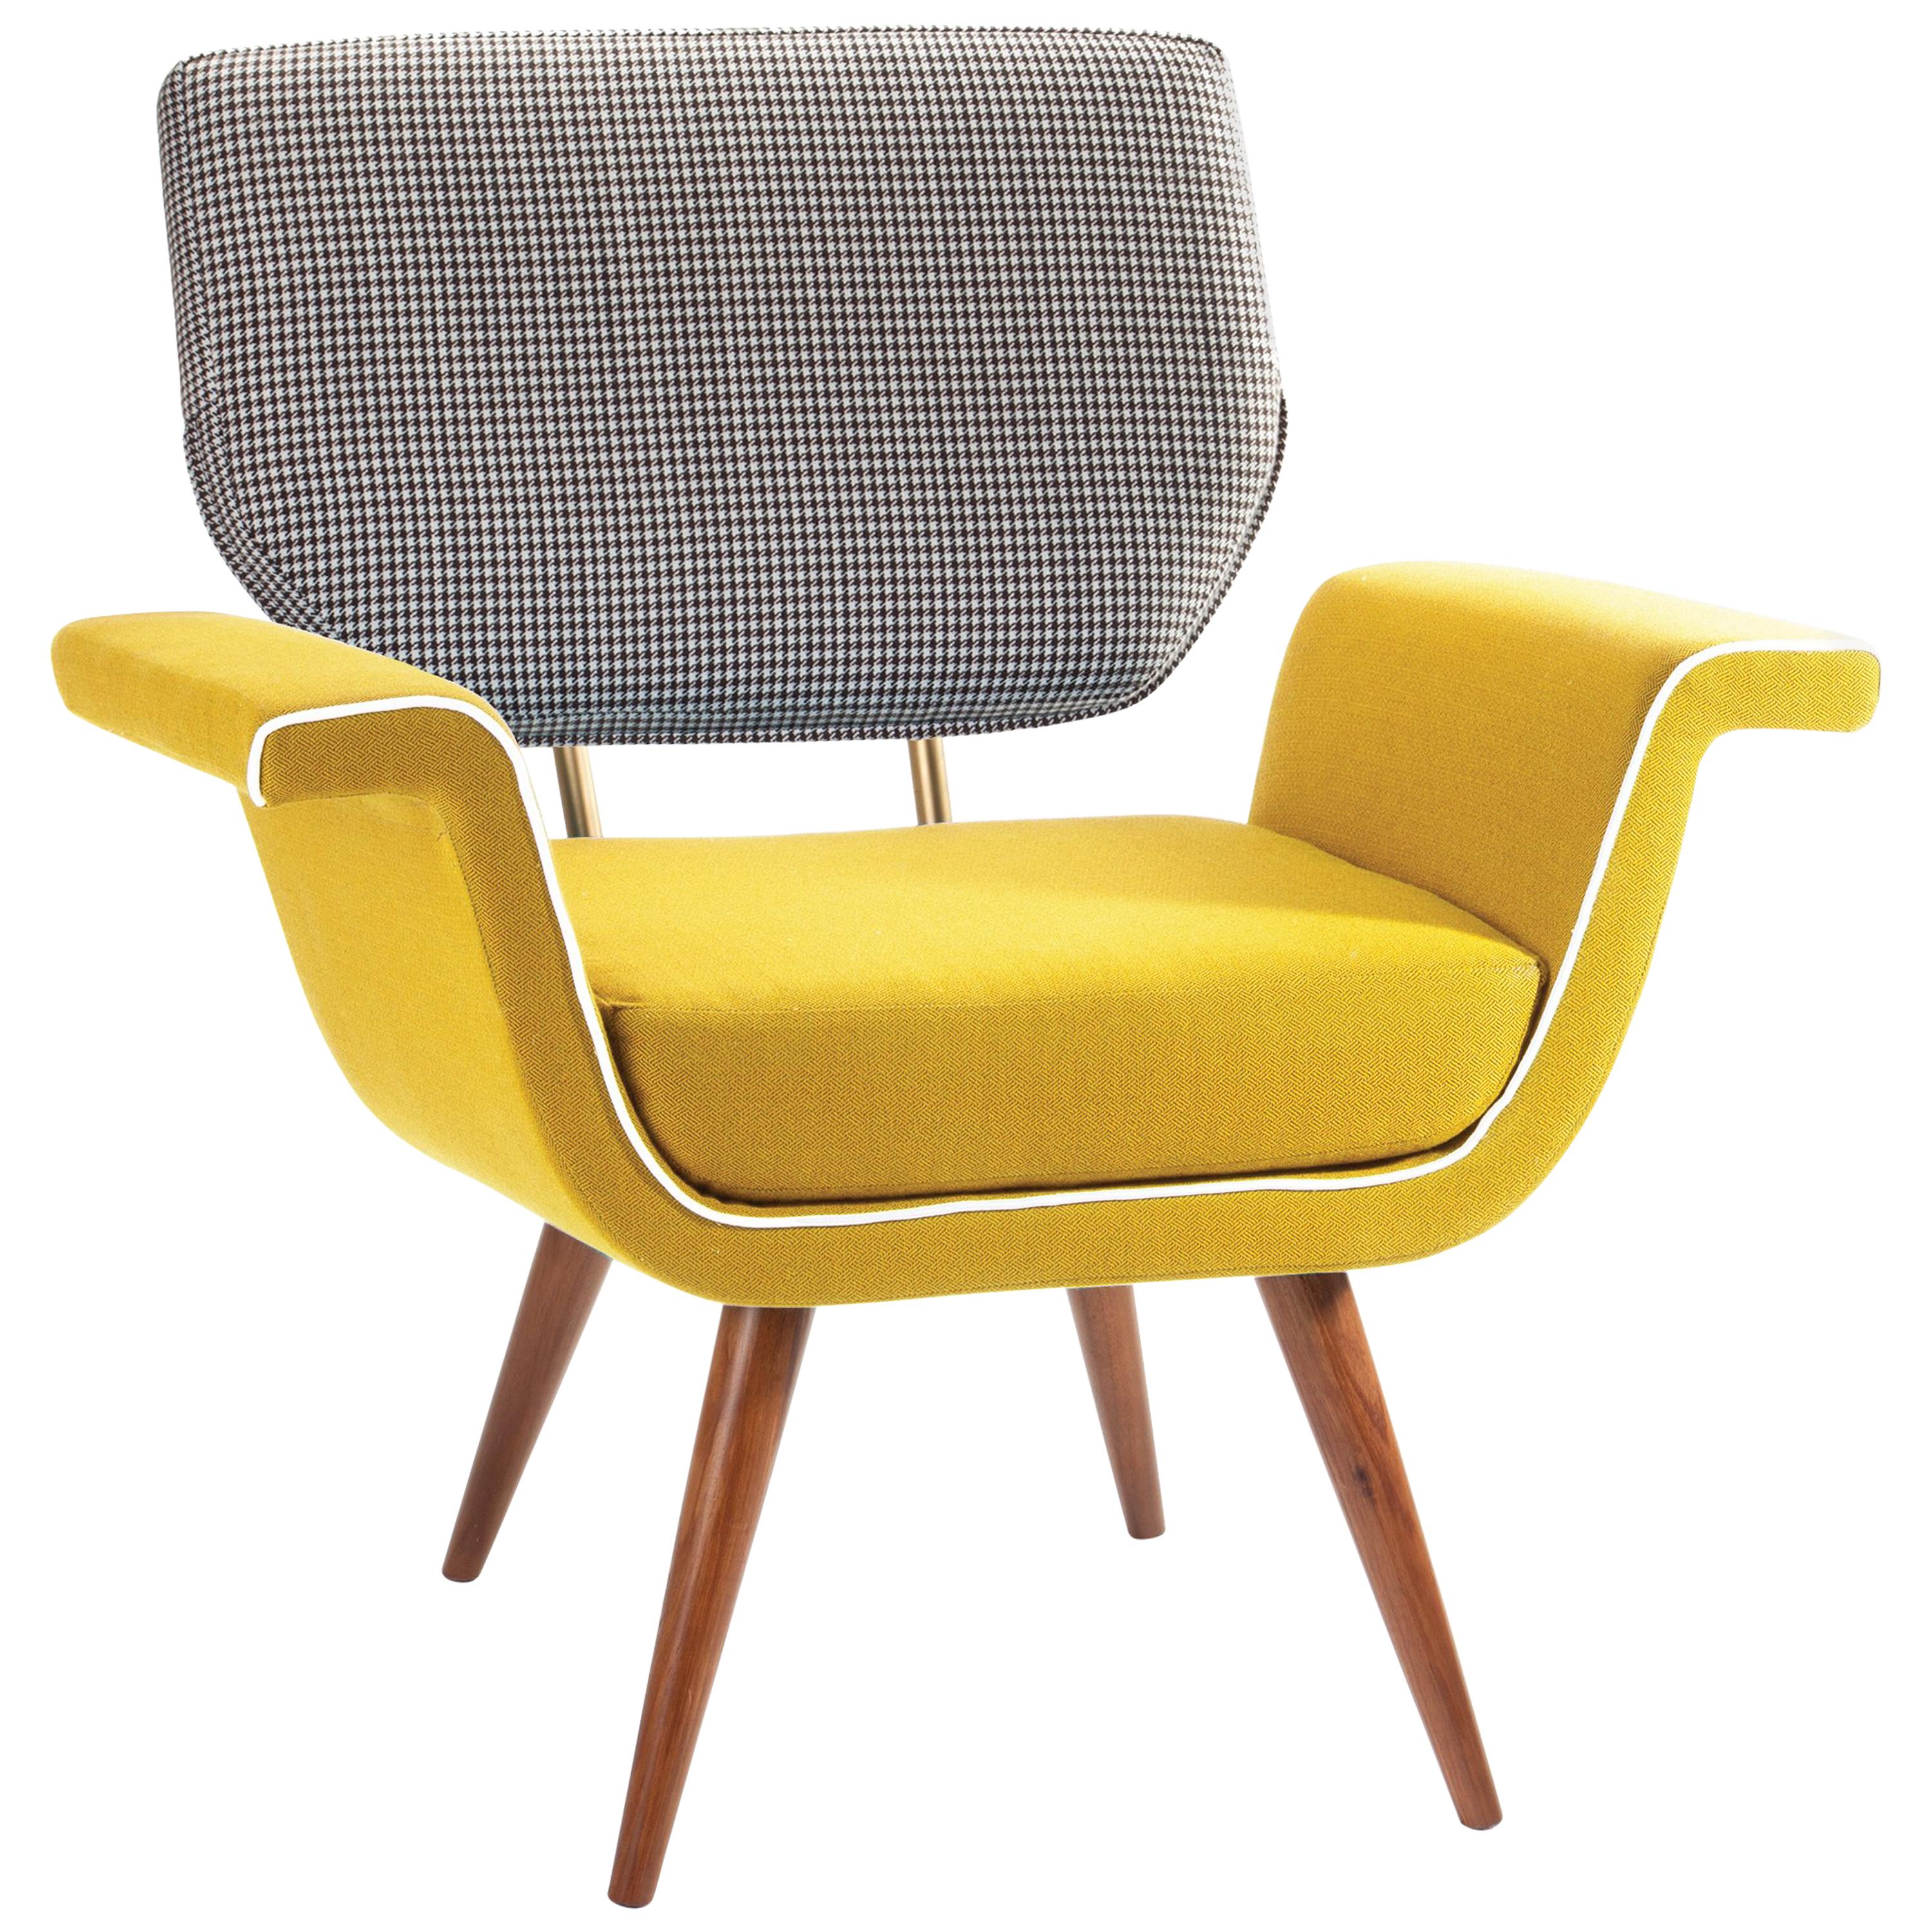 Gorgeous armchair with houndstooth back, yellow or blue velvet seat and polished brass details on the back. Made to Order. 

If you are planning on ordering an upholstery item with COM upholstery, please follow these instructions: 
- Let us know